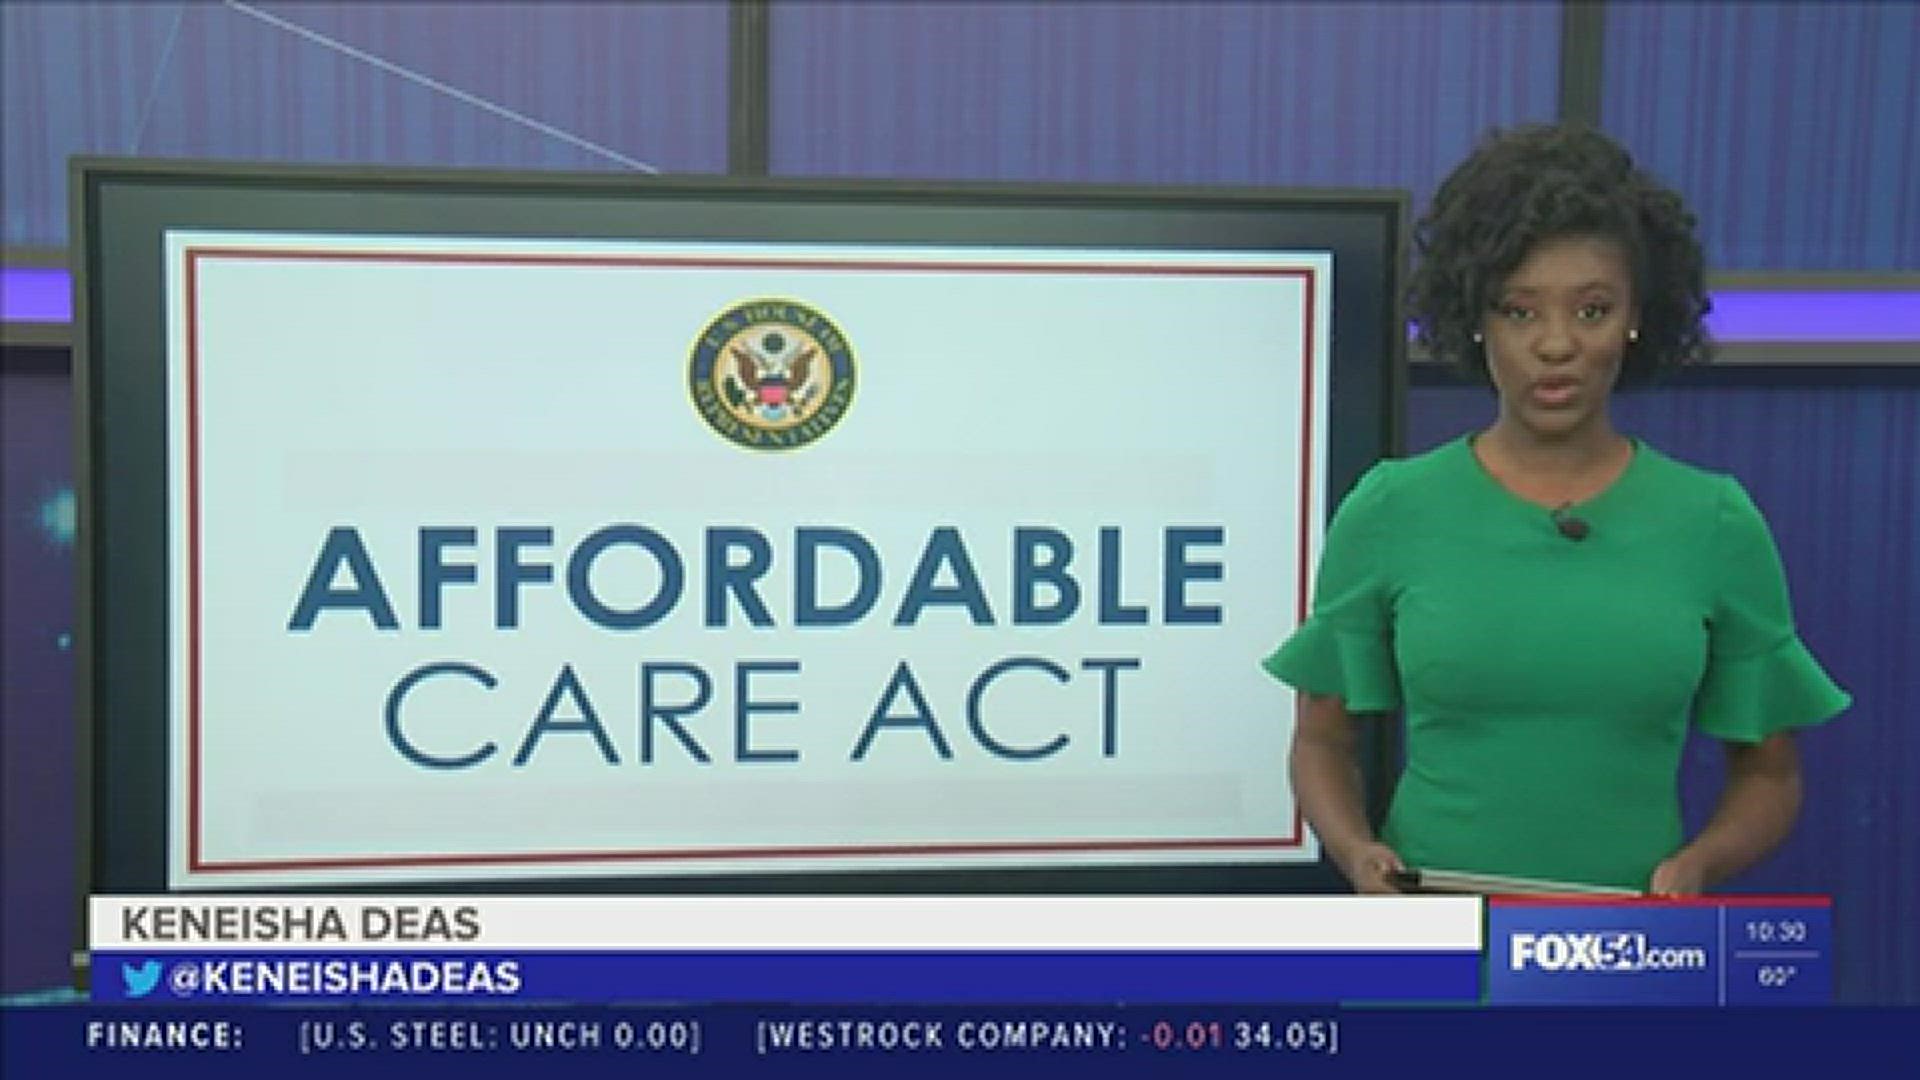 The Afforable Care Act also known as Obamacare opened for enrollment on November 1st.